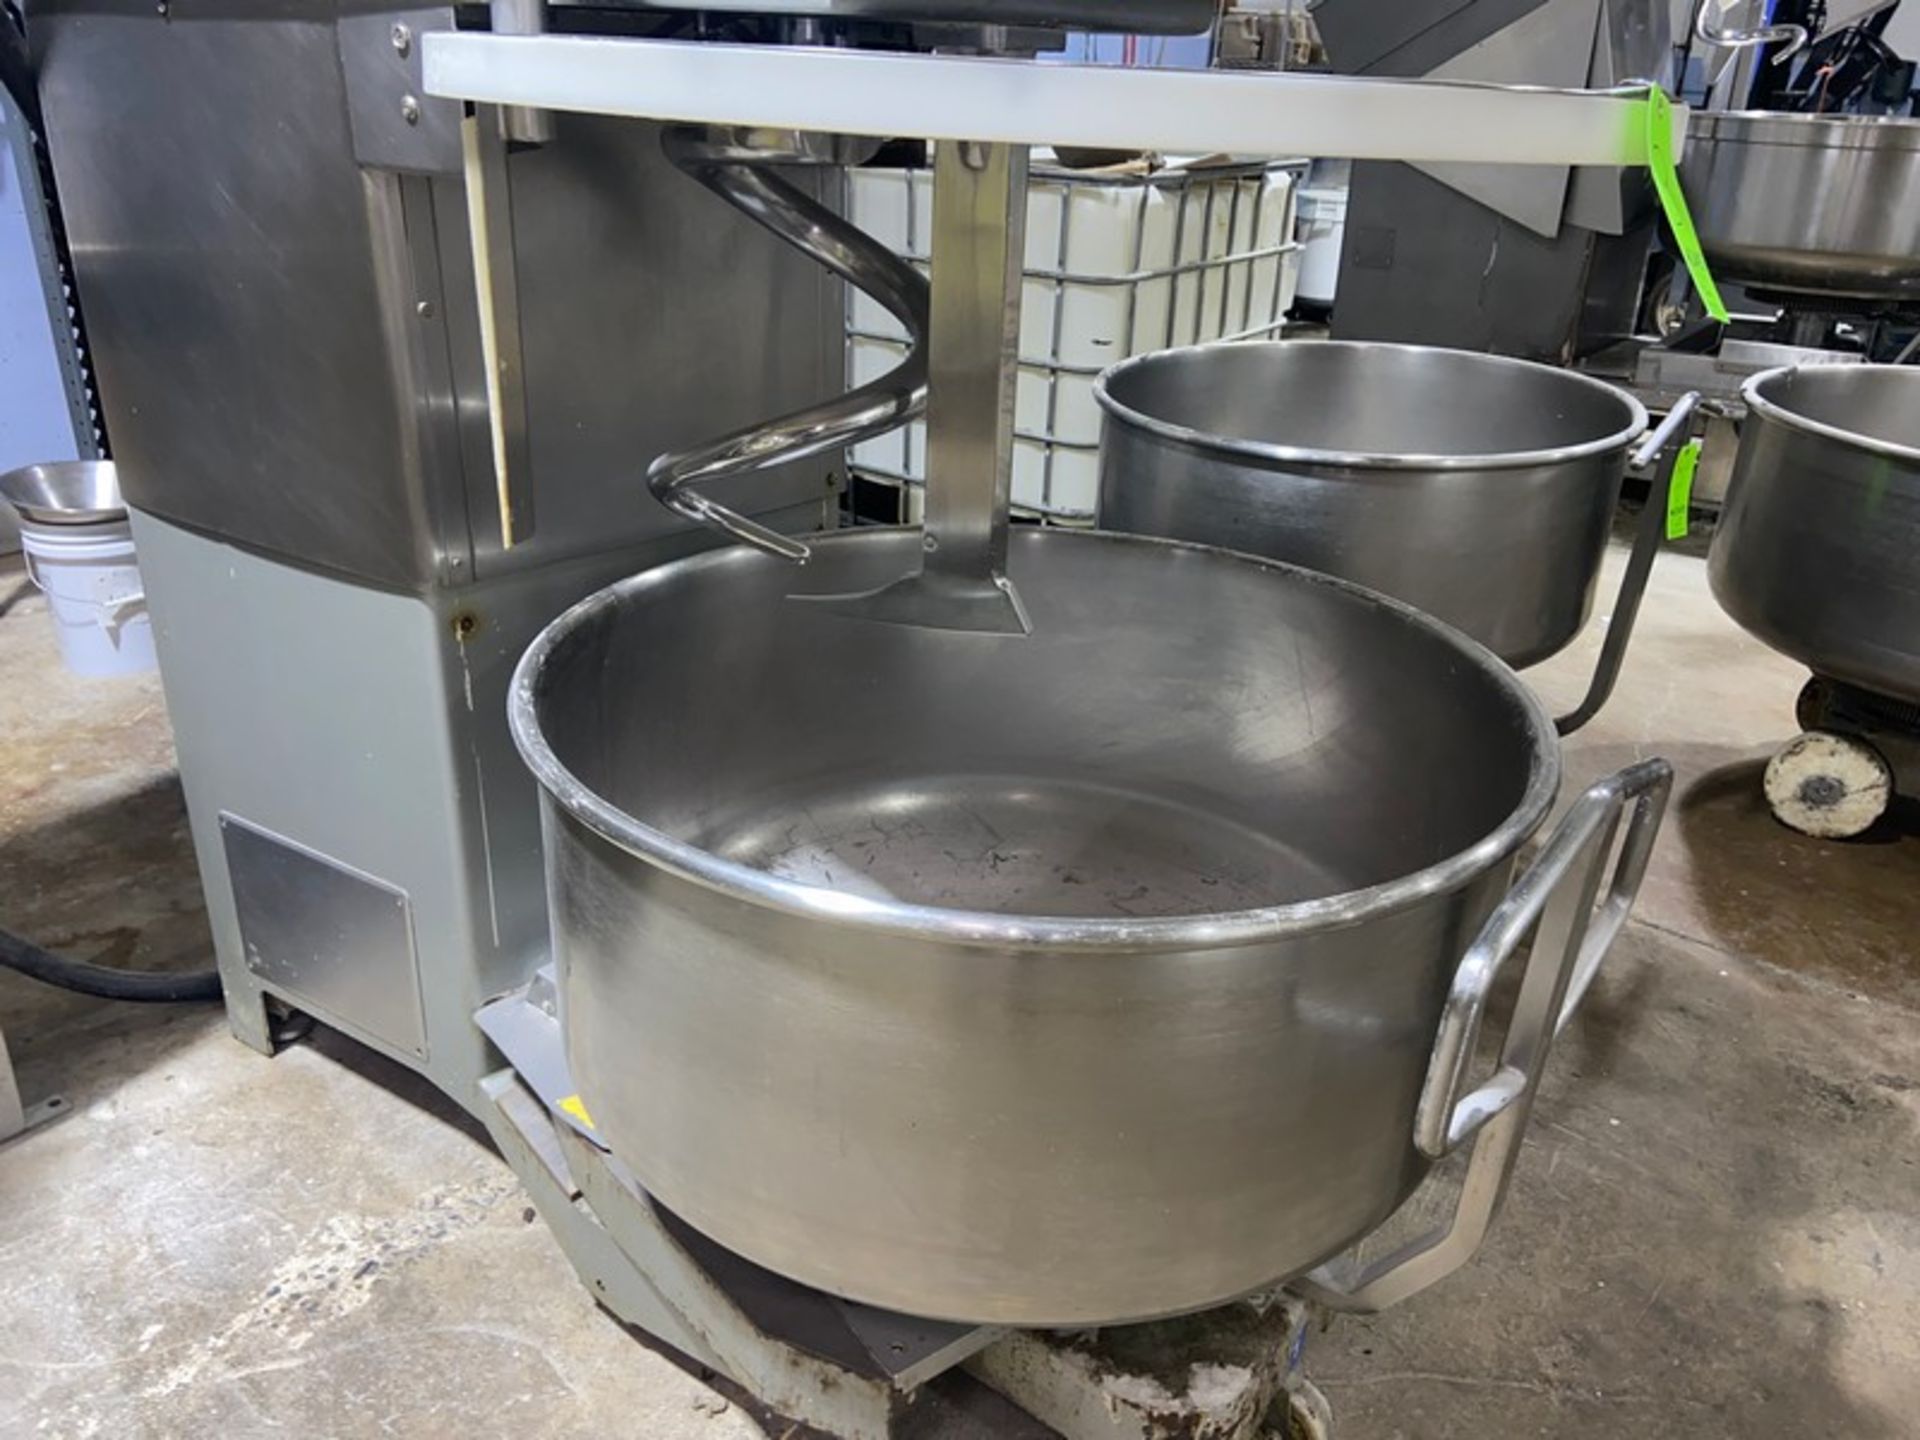 Kemper S/S Dough Mixer, Type: PRO 150 ASPS, Date-Code: J3A-98141/629027, 480 Volts, 3 Phase, with - Image 4 of 13